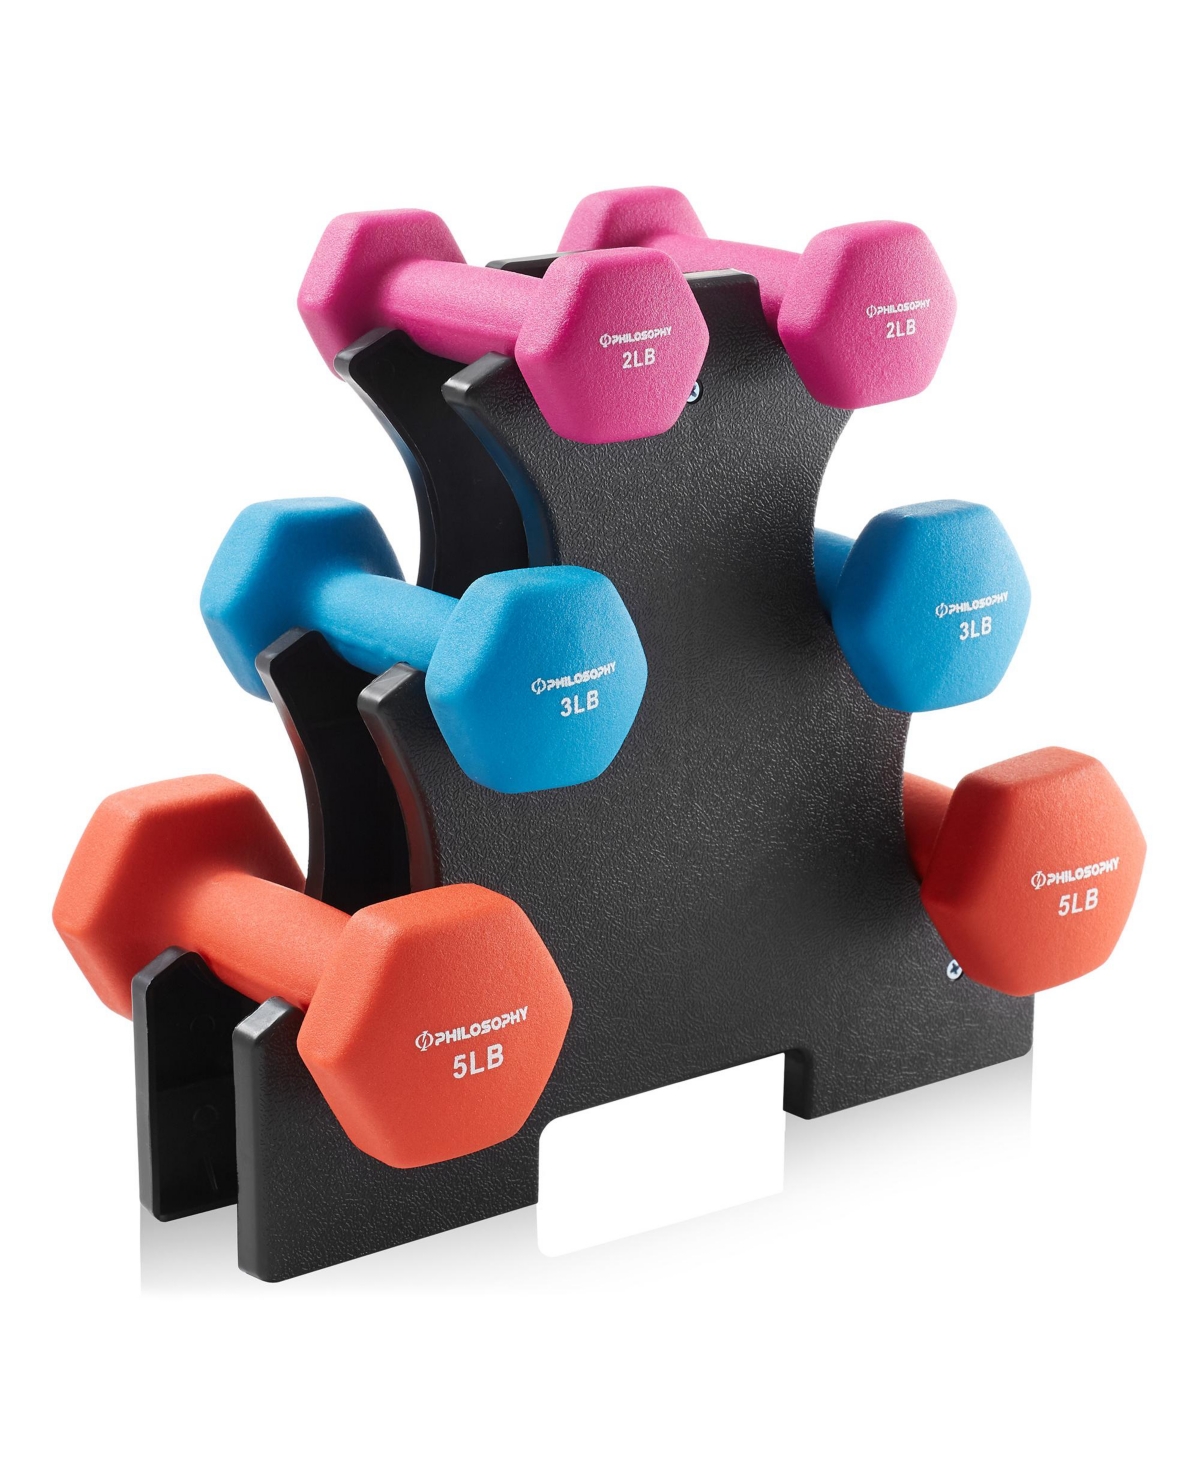 Neoprene Dumbbell Hand Weights with Stand, 20 lbs (2 lb, 3 lb, 5 lb Pairs)